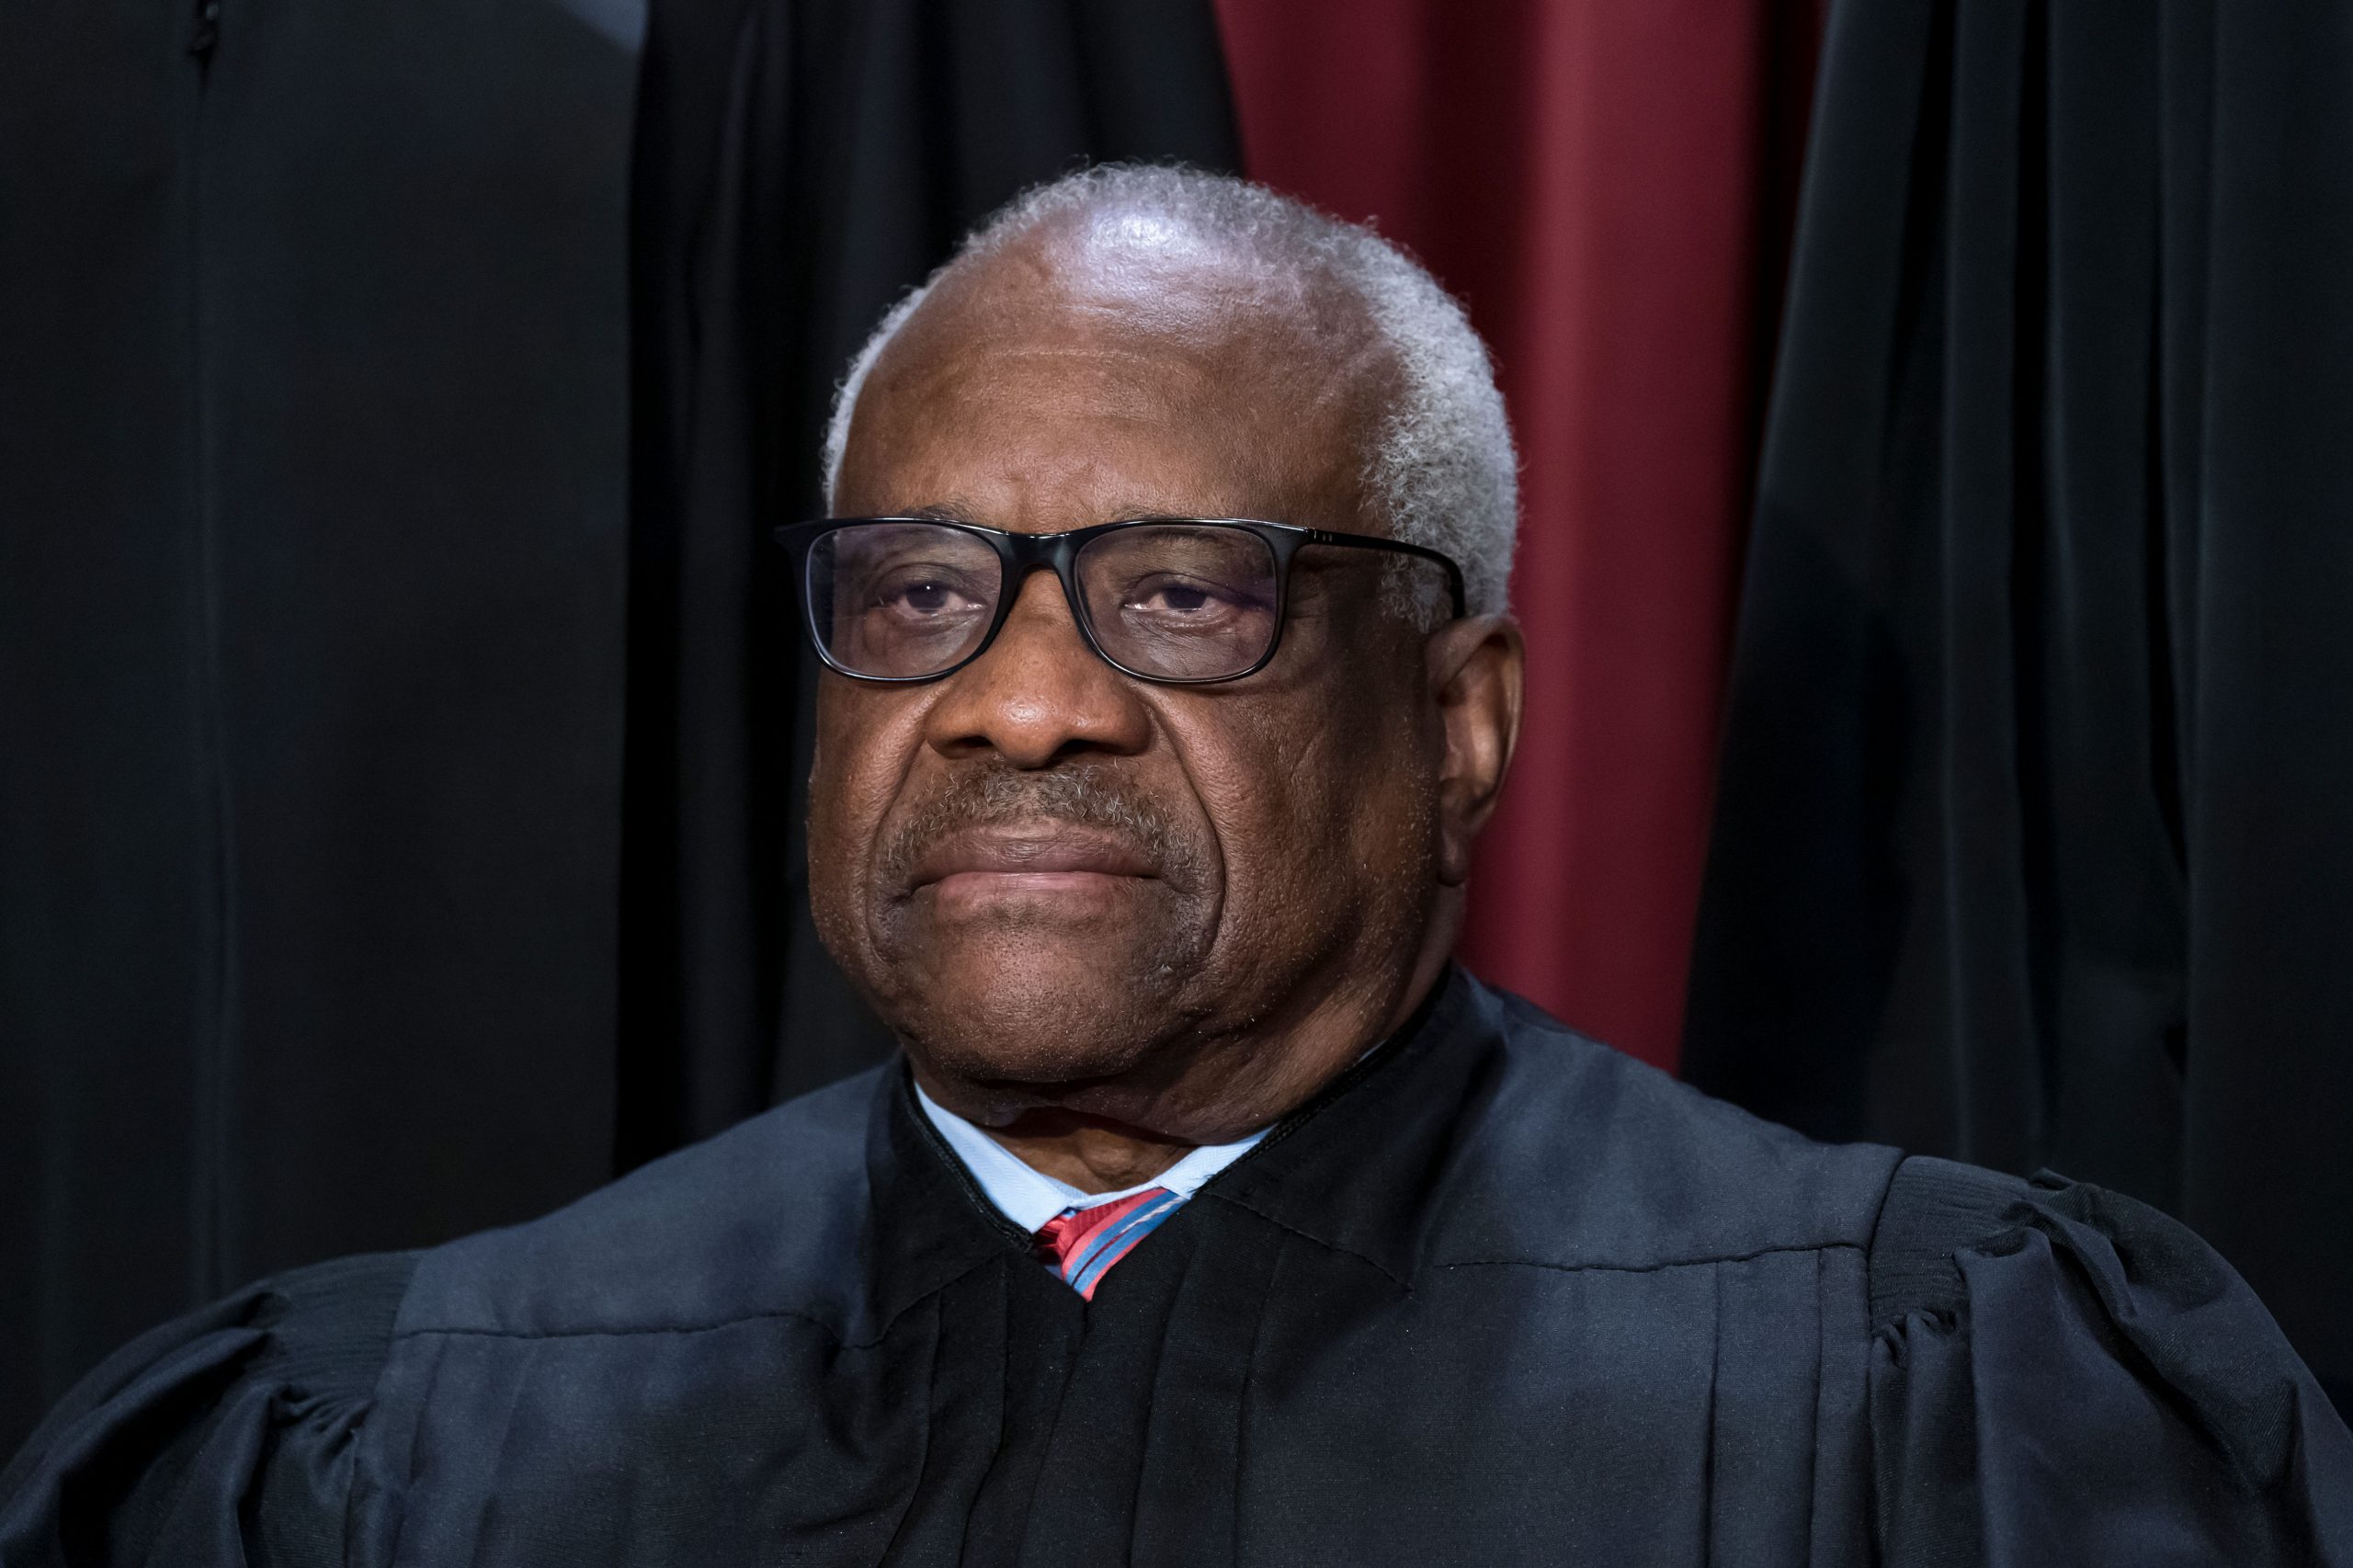 Clarence Thomas was pivotal in delaying Congress certification of 2020 elections: Trump lawyers